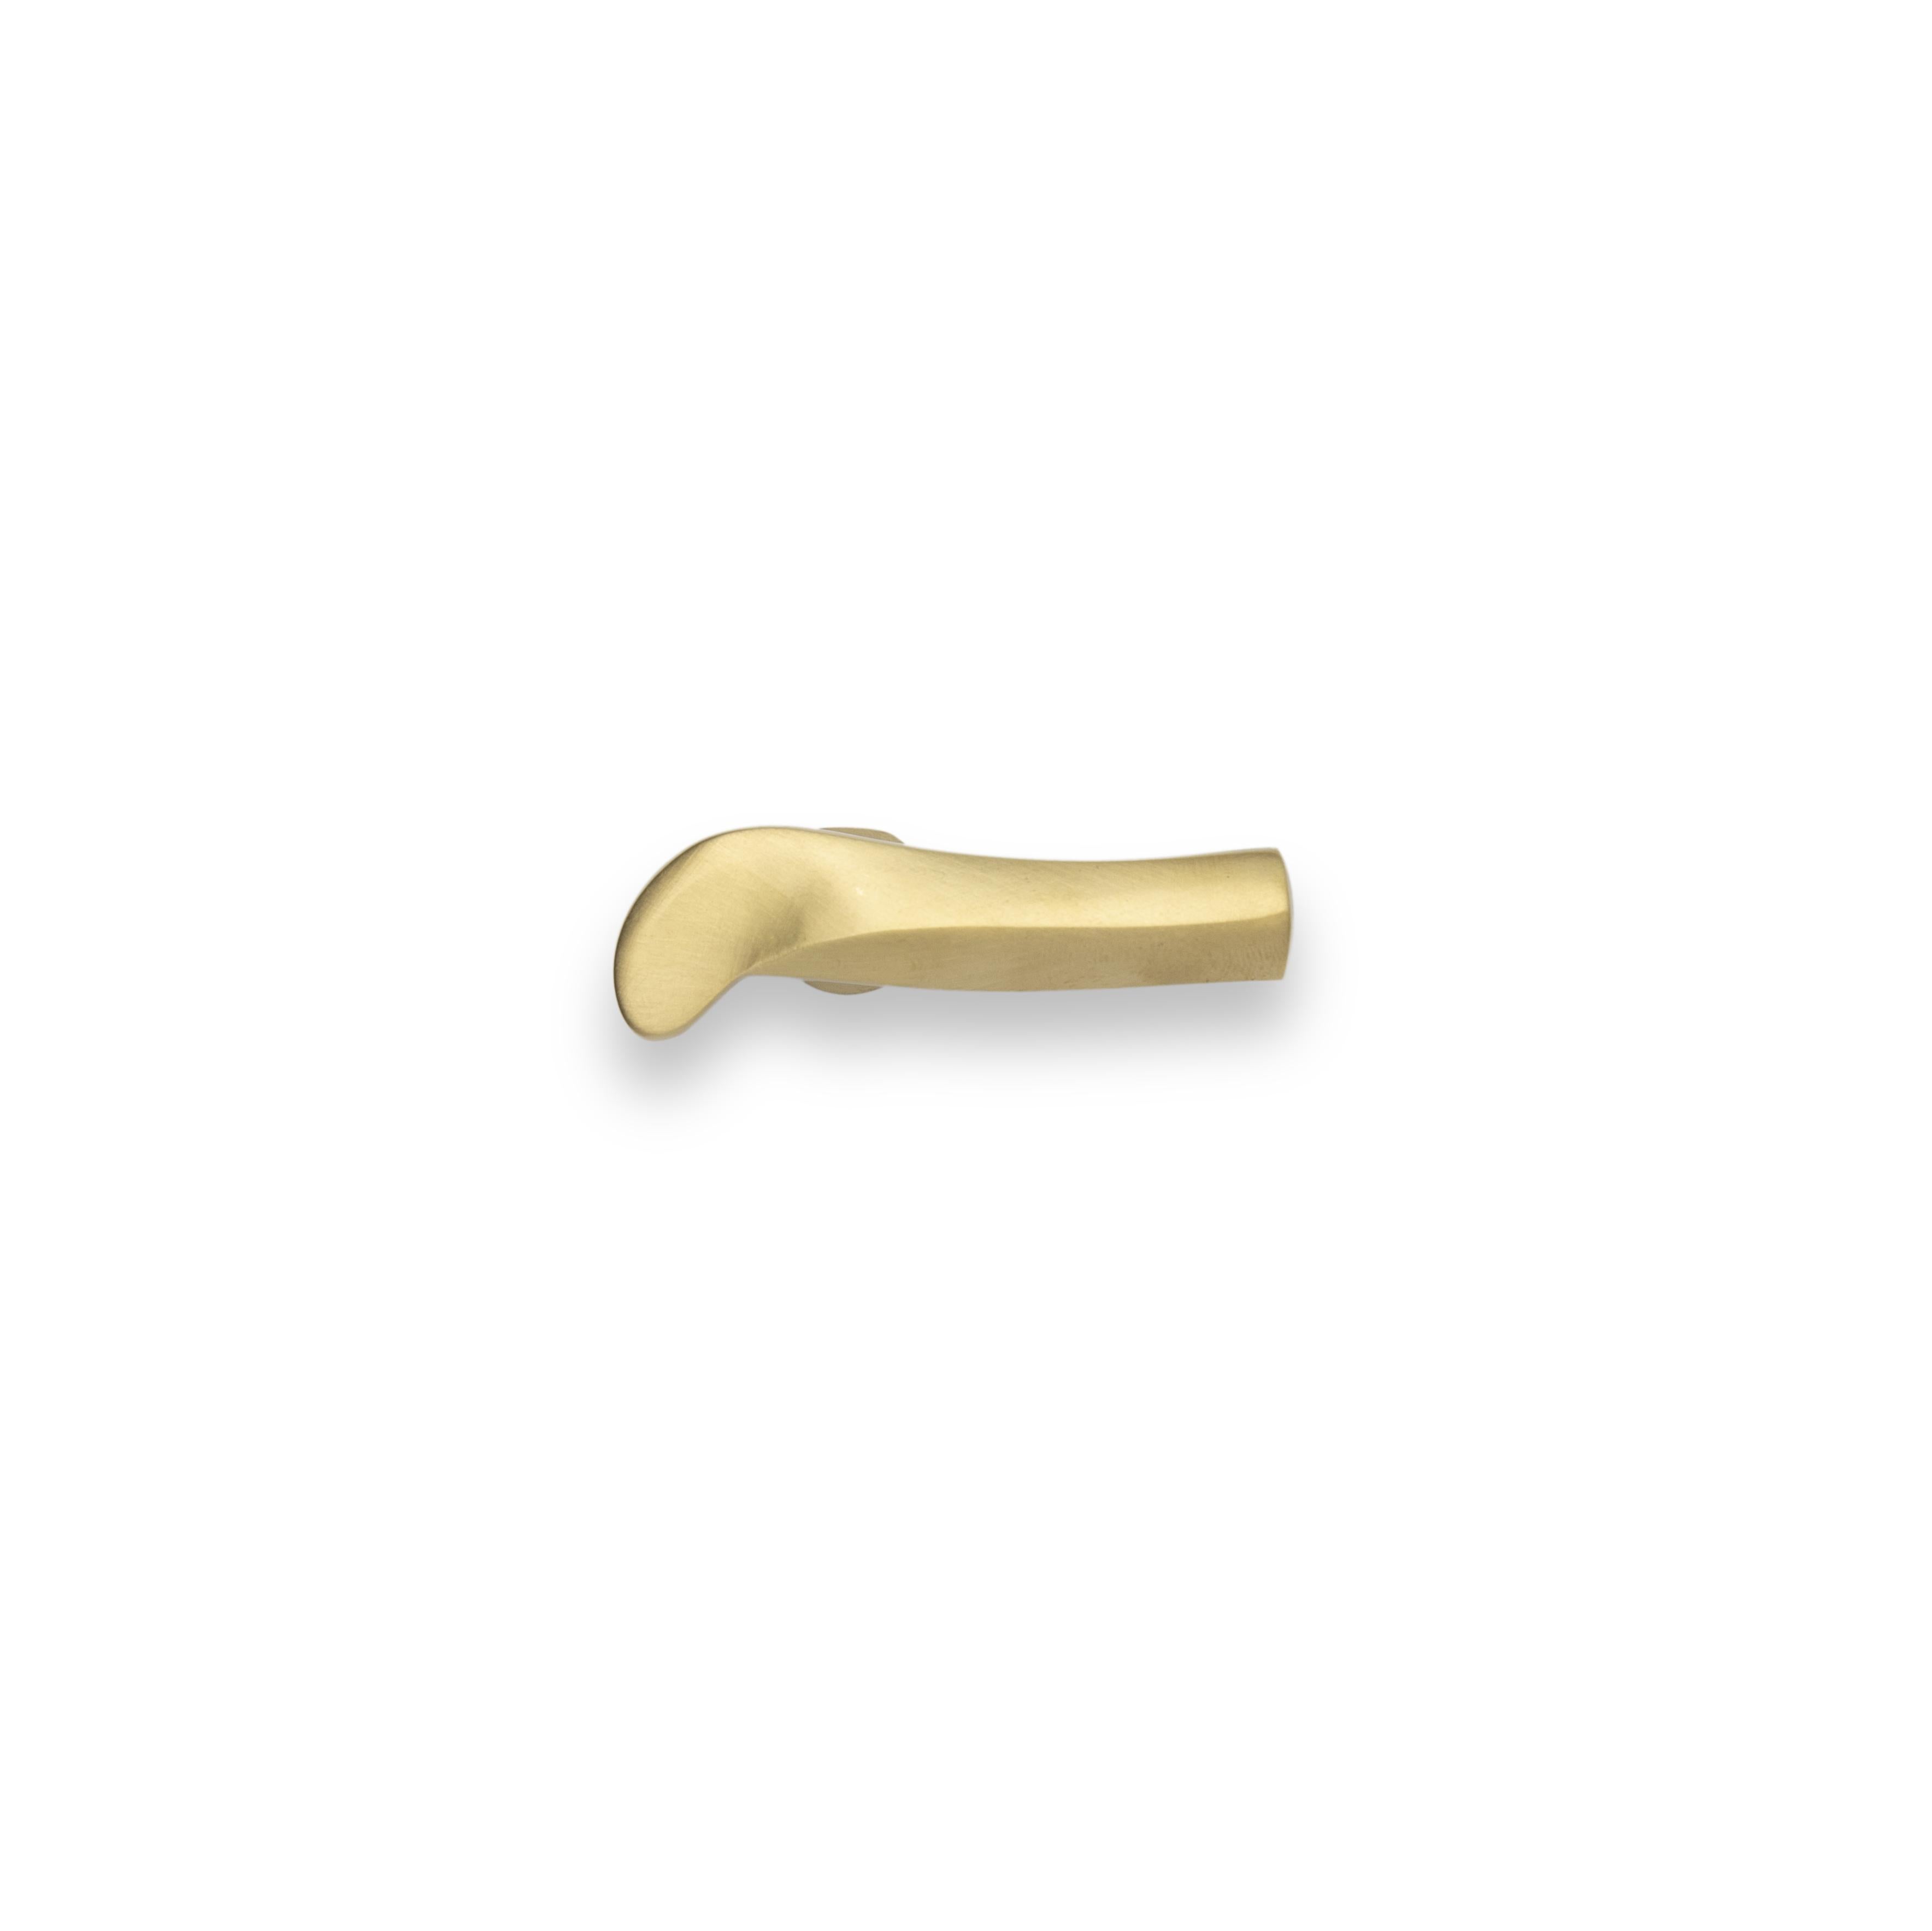 Other Prisma Brass Knobs For Sale